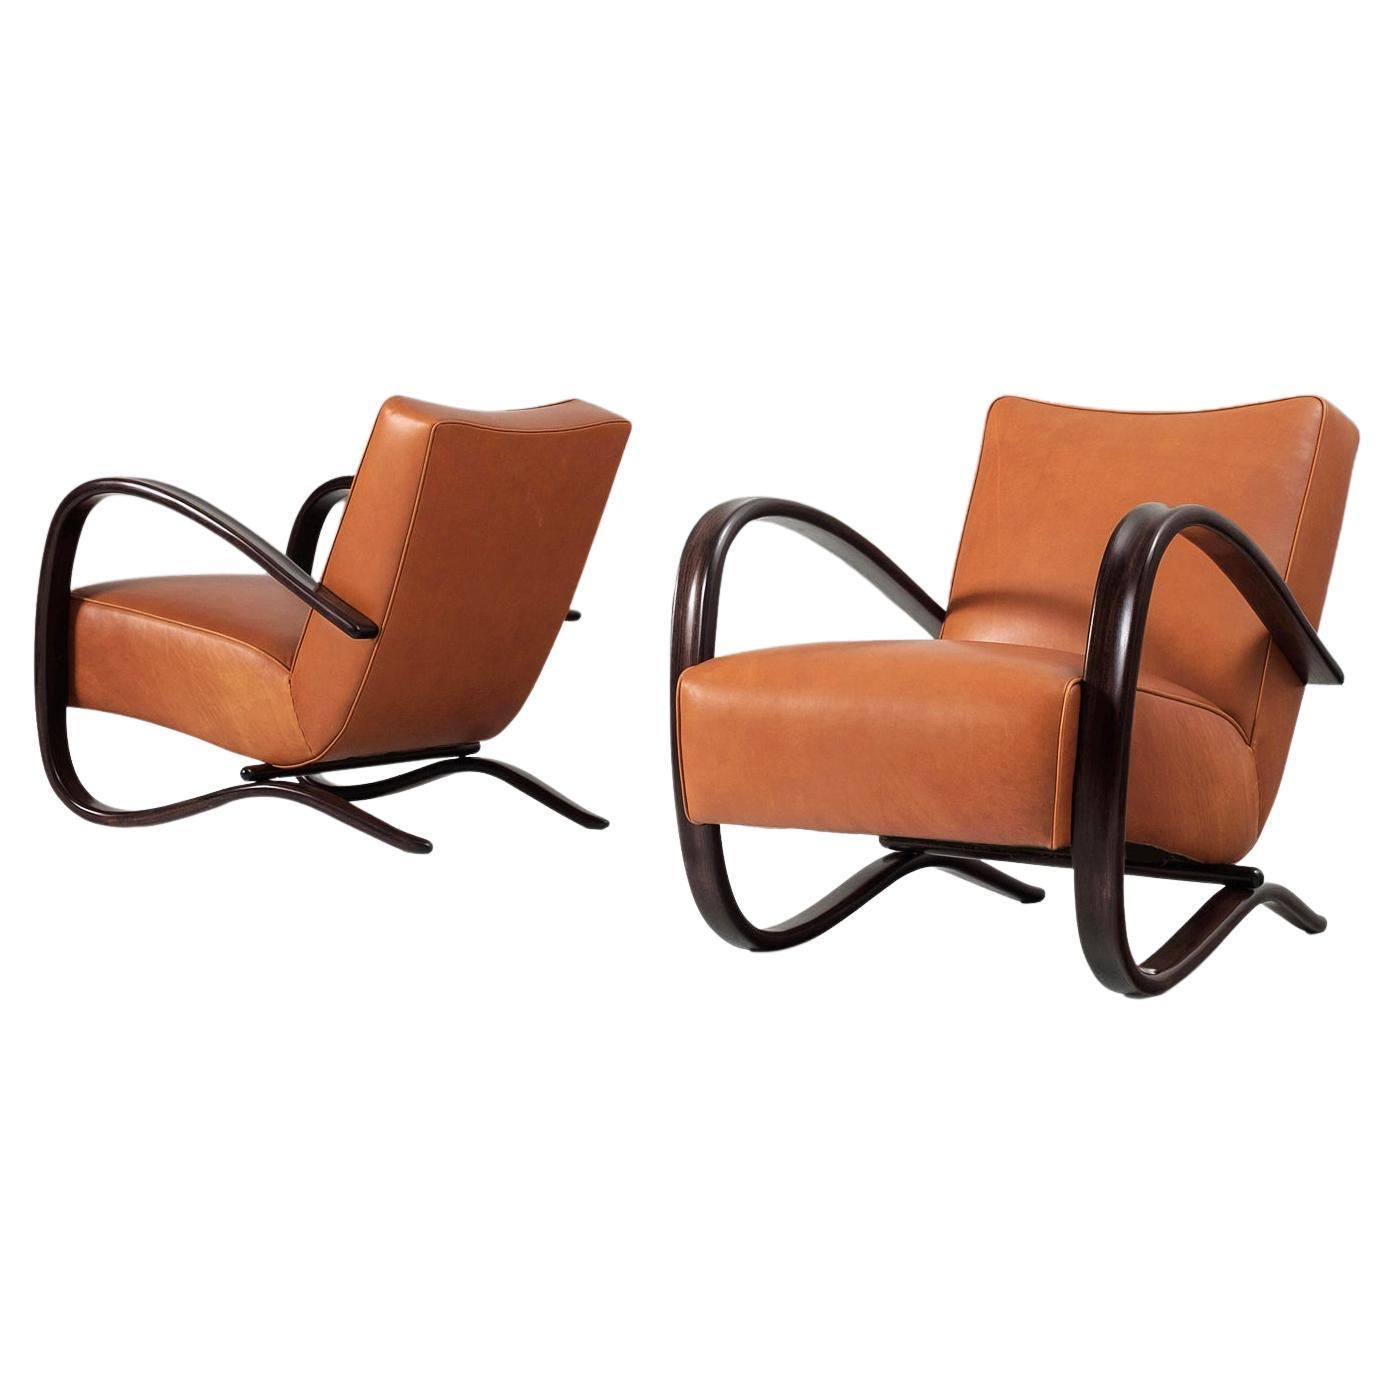 Jindrich Halabala Lounge Chairs in Cognac Leather